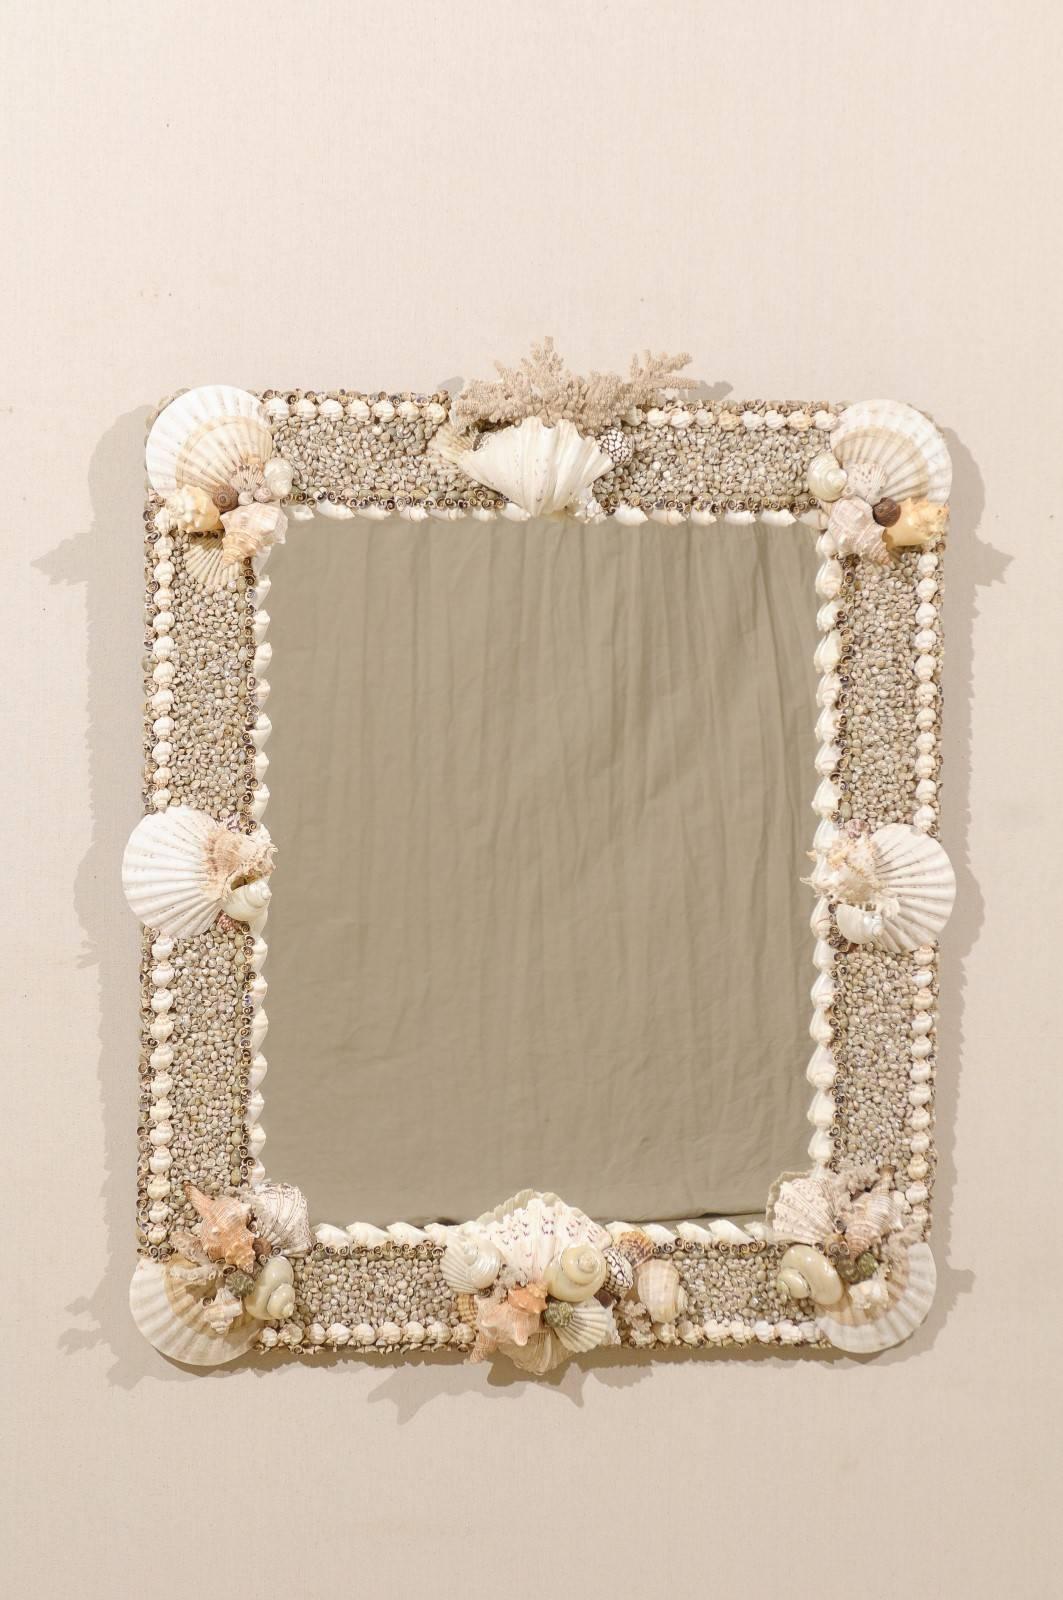 A shell and coral decorated wall mirror. This oceanic inspired mirror is comprised of various real shells, coral and ocean rock from the Indian Ocean and the Philippines. Bringing a taste of the outdoors in, this nautical mirror has a lovely seaside